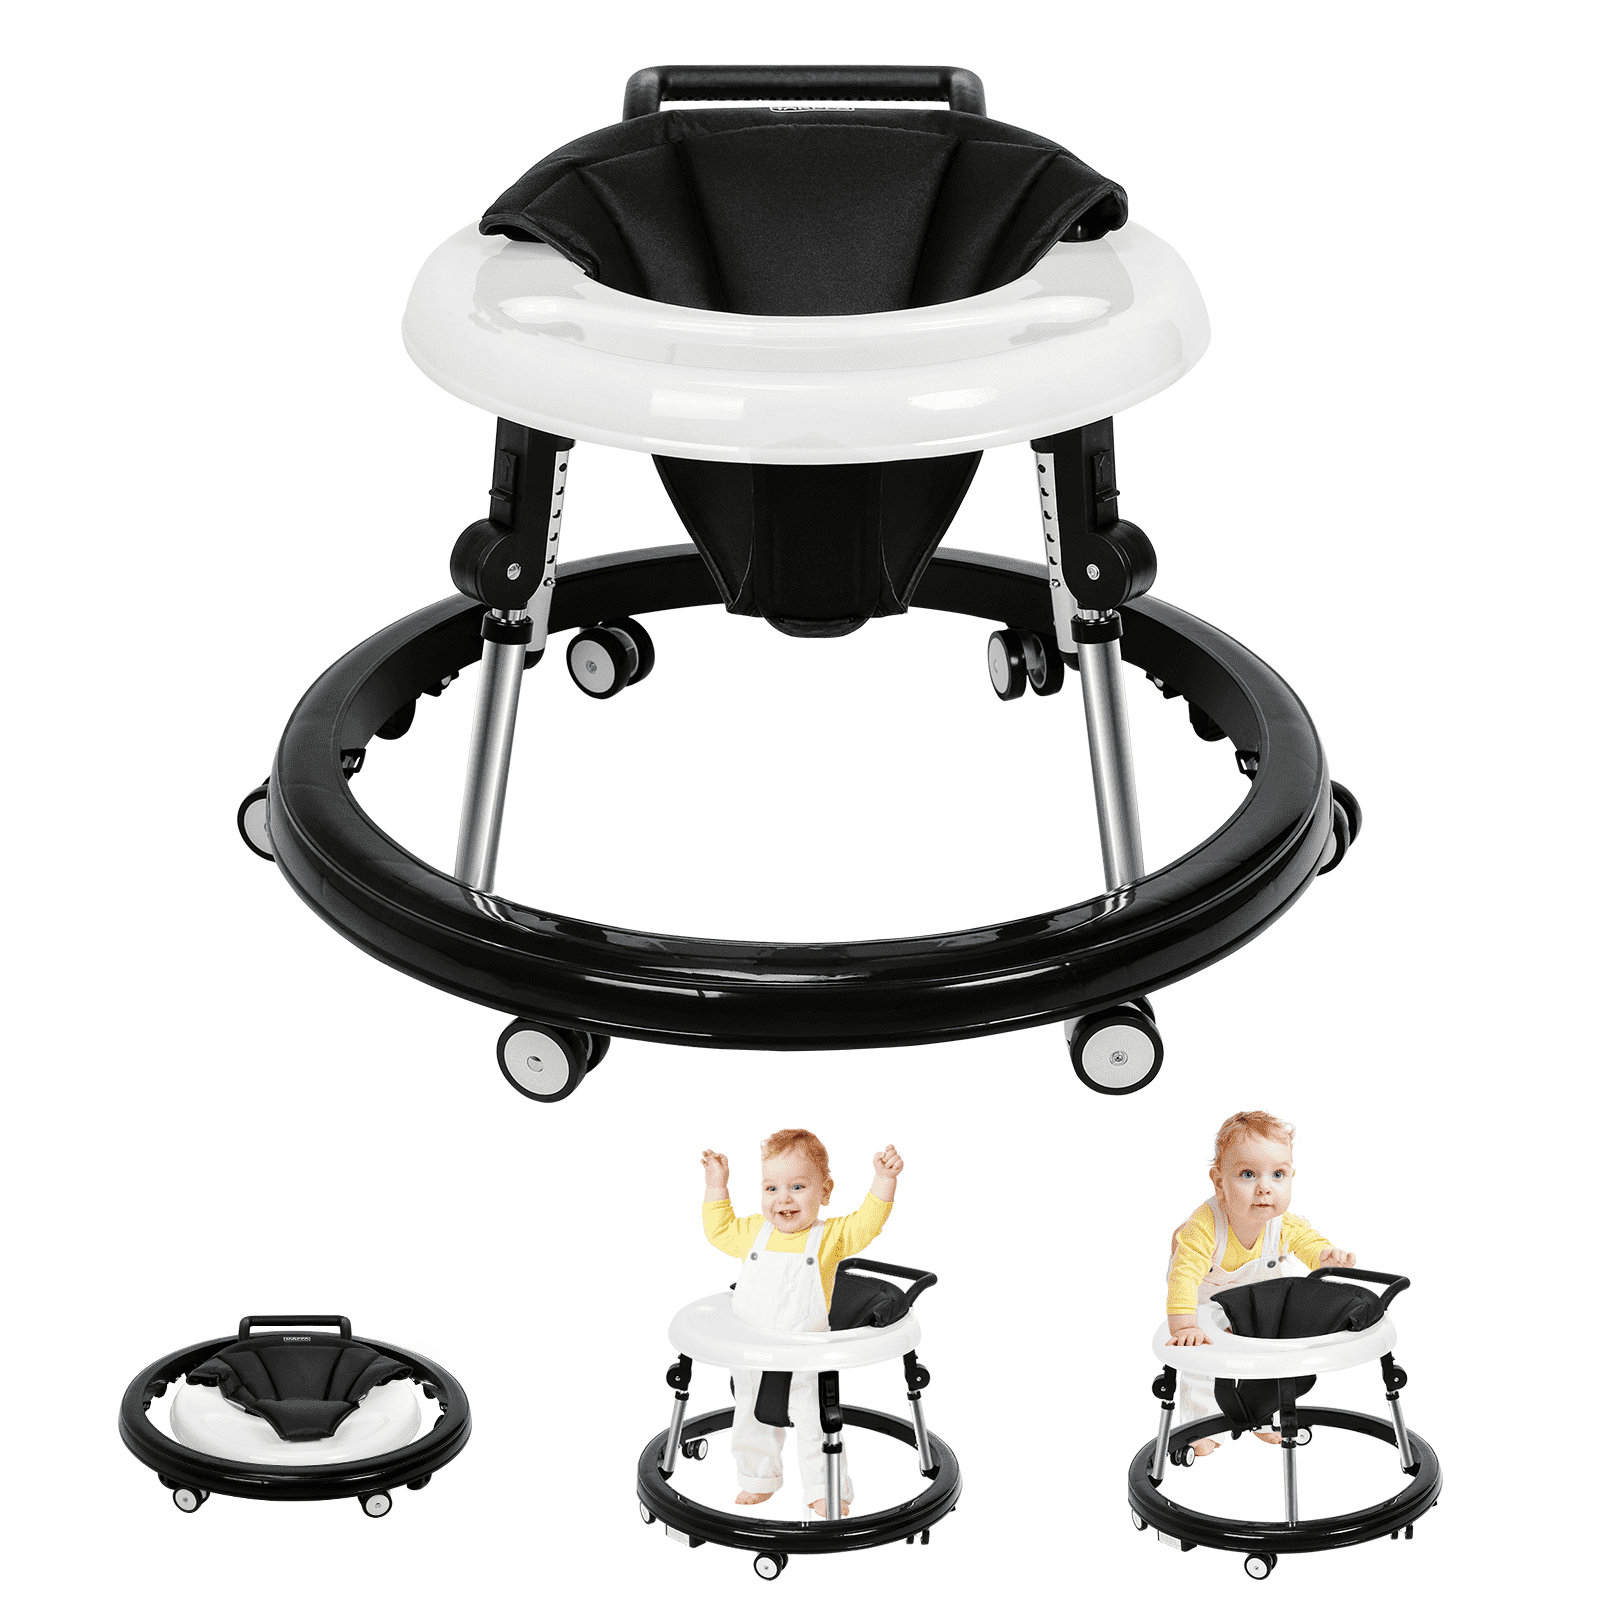 HARPPA Foldable Baby Walker, Sit to Stand Activity Center with Wheels, Seat  and Height Adjustable (Black)